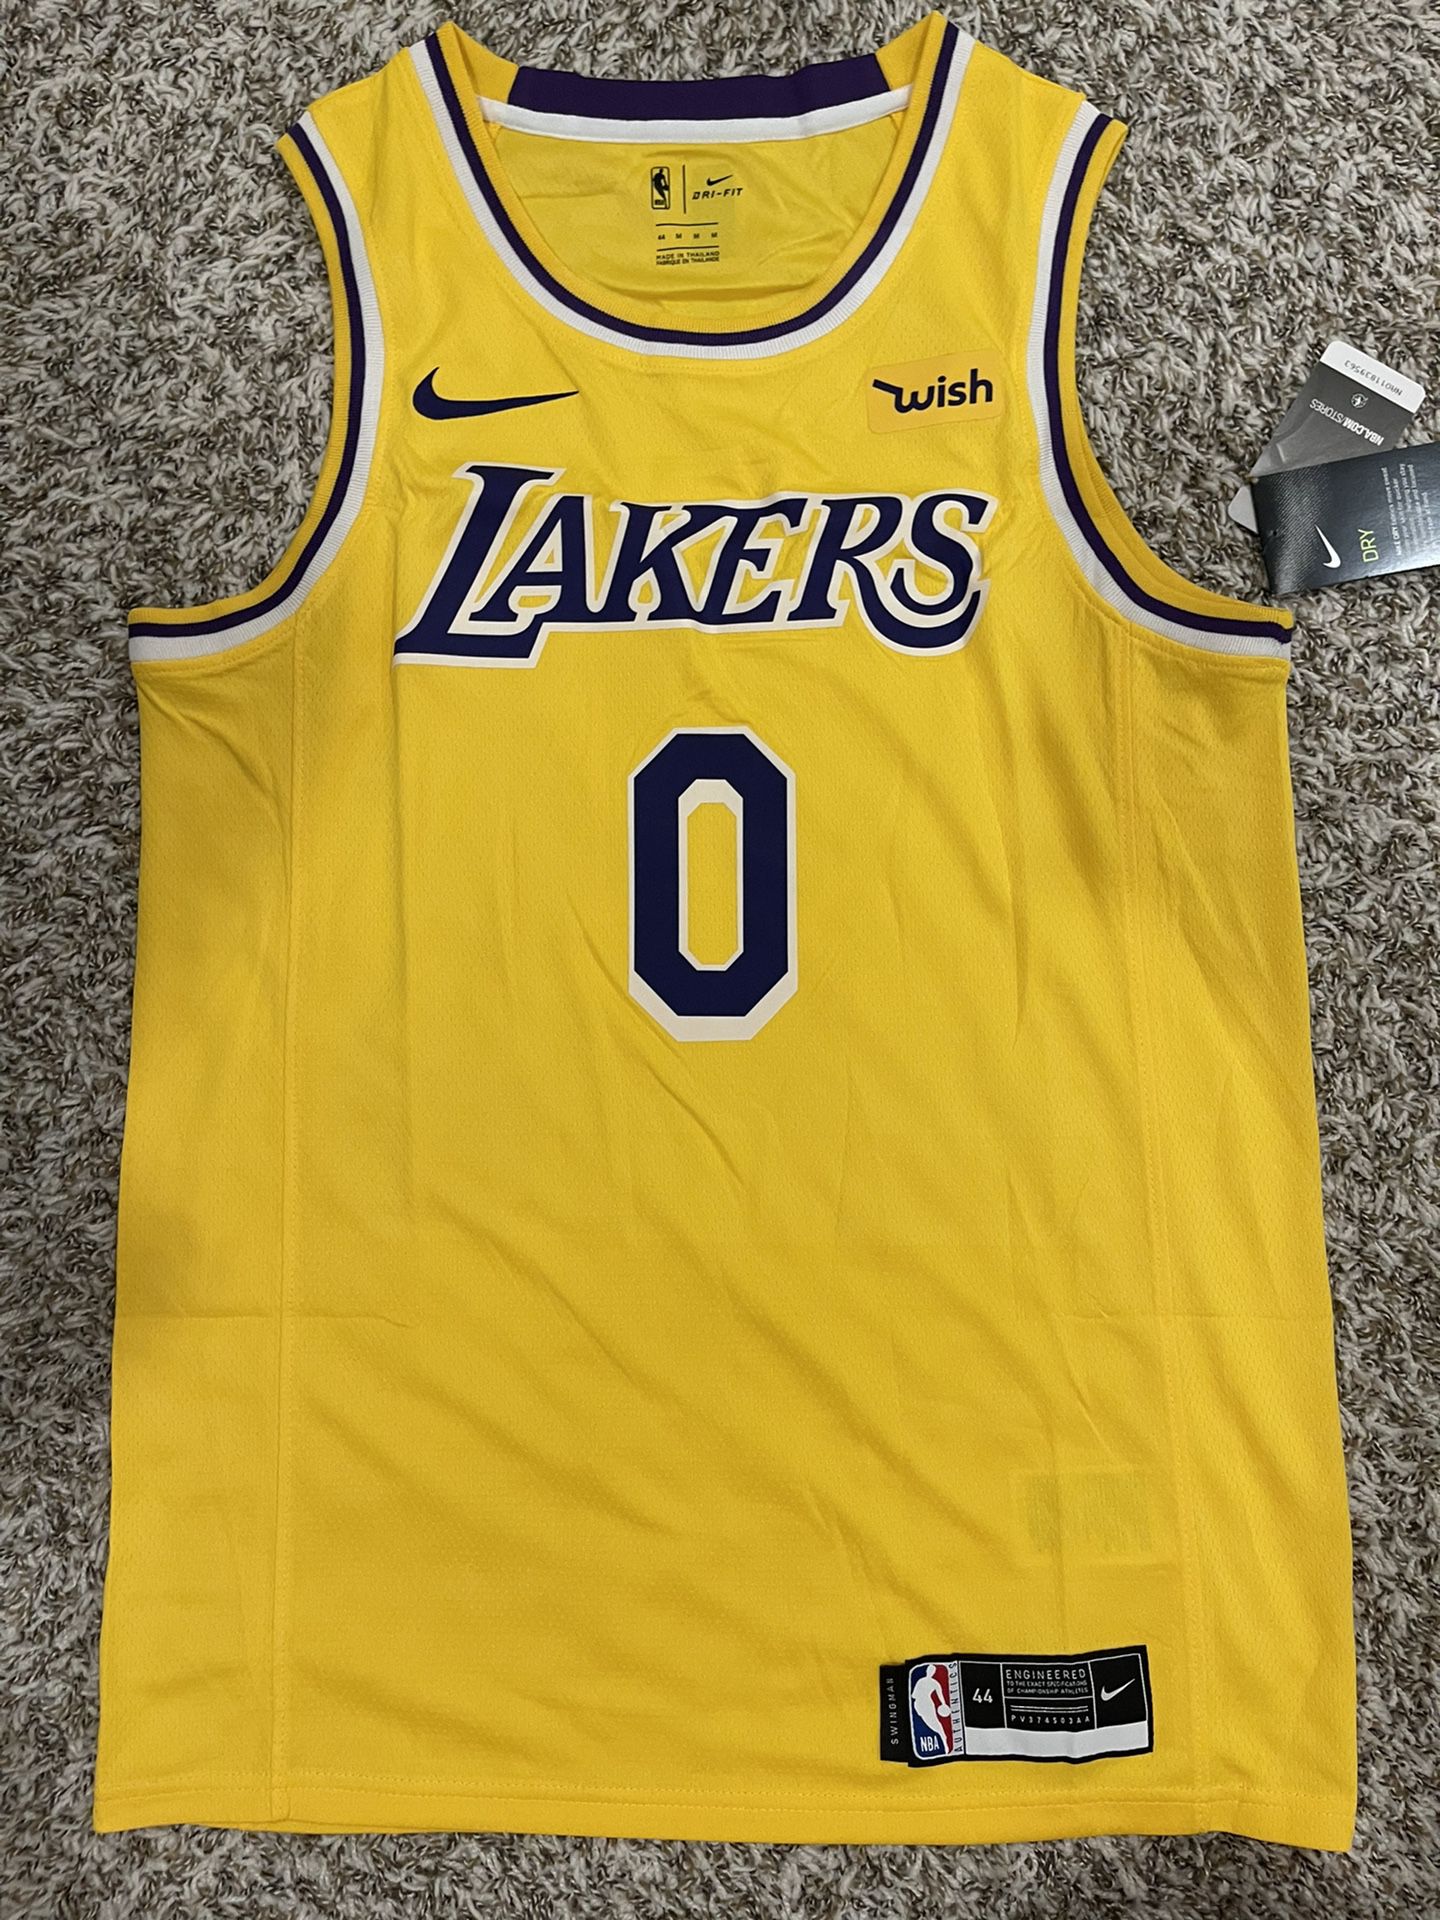 Russell Westbrook #0 Lakers Jersey M-XL